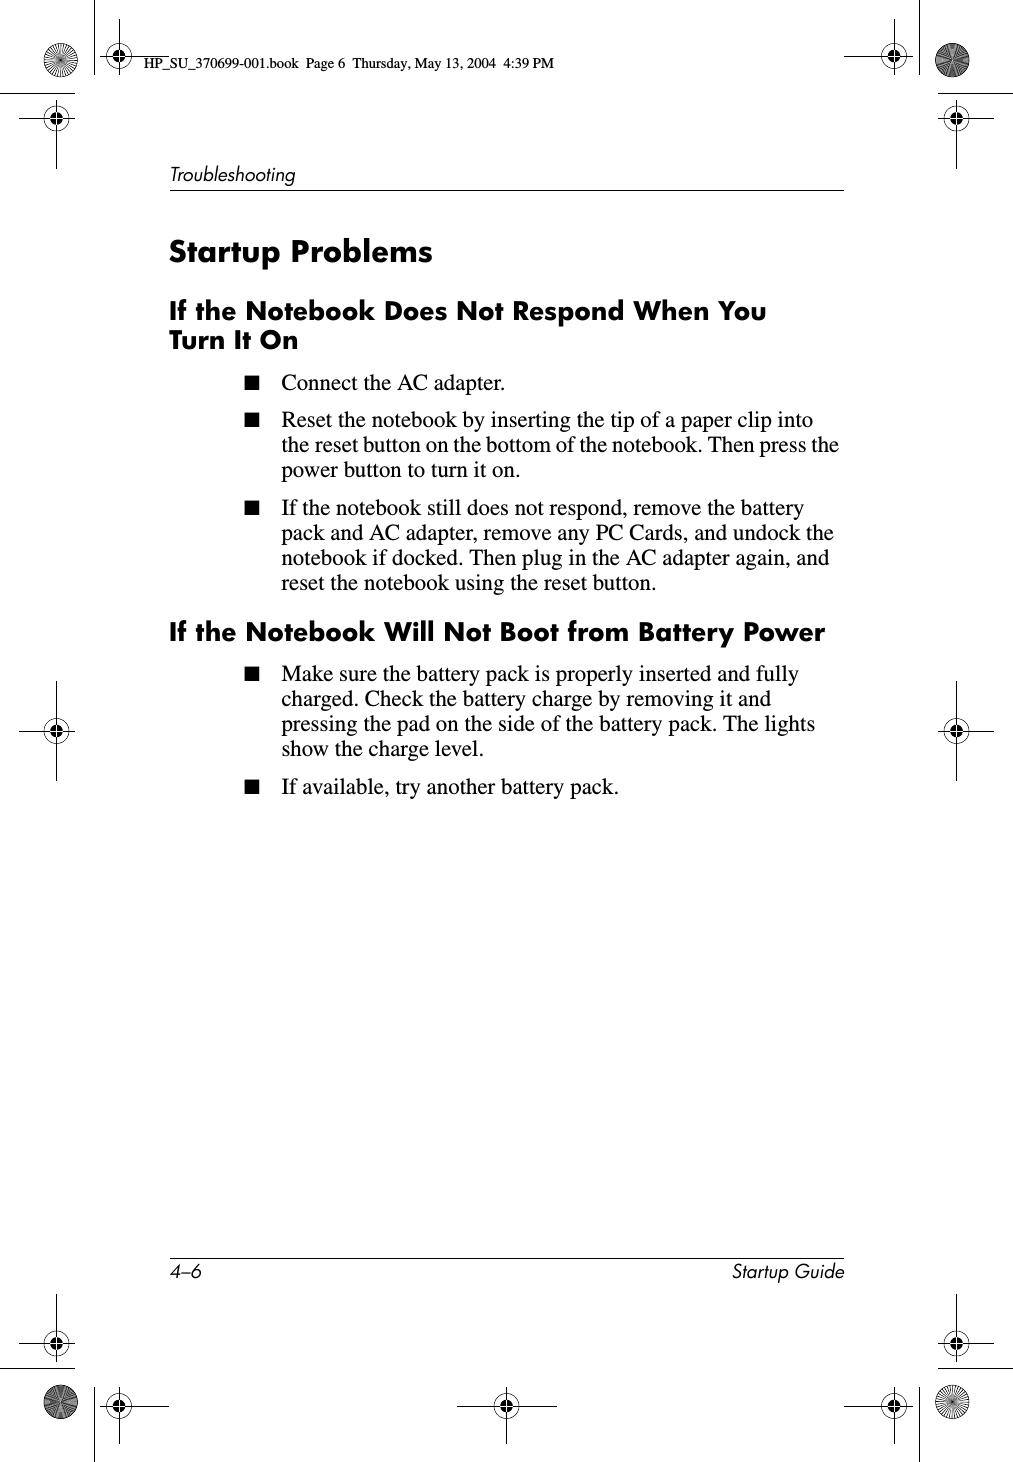 4–6 Startup GuideTroubleshootingStartup ProblemsIf the Notebook Does Not Respond When You Turn It On■Connect the AC adapter. ■Reset the notebook by inserting the tip of a paper clip into the reset button on the bottom of the notebook. Then press the power button to turn it on.■If the notebook still does not respond, remove the battery pack and AC adapter, remove any PC Cards, and undock the notebook if docked. Then plug in the AC adapter again, and reset the notebook using the reset button.If the Notebook Will Not Boot from Battery Power■Make sure the battery pack is properly inserted and fully charged. Check the battery charge by removing it and pressing the pad on the side of the battery pack. The lights show the charge level.■If available, try another battery pack.HP_SU_370699-001.book  Page 6  Thursday, May 13, 2004  4:39 PM